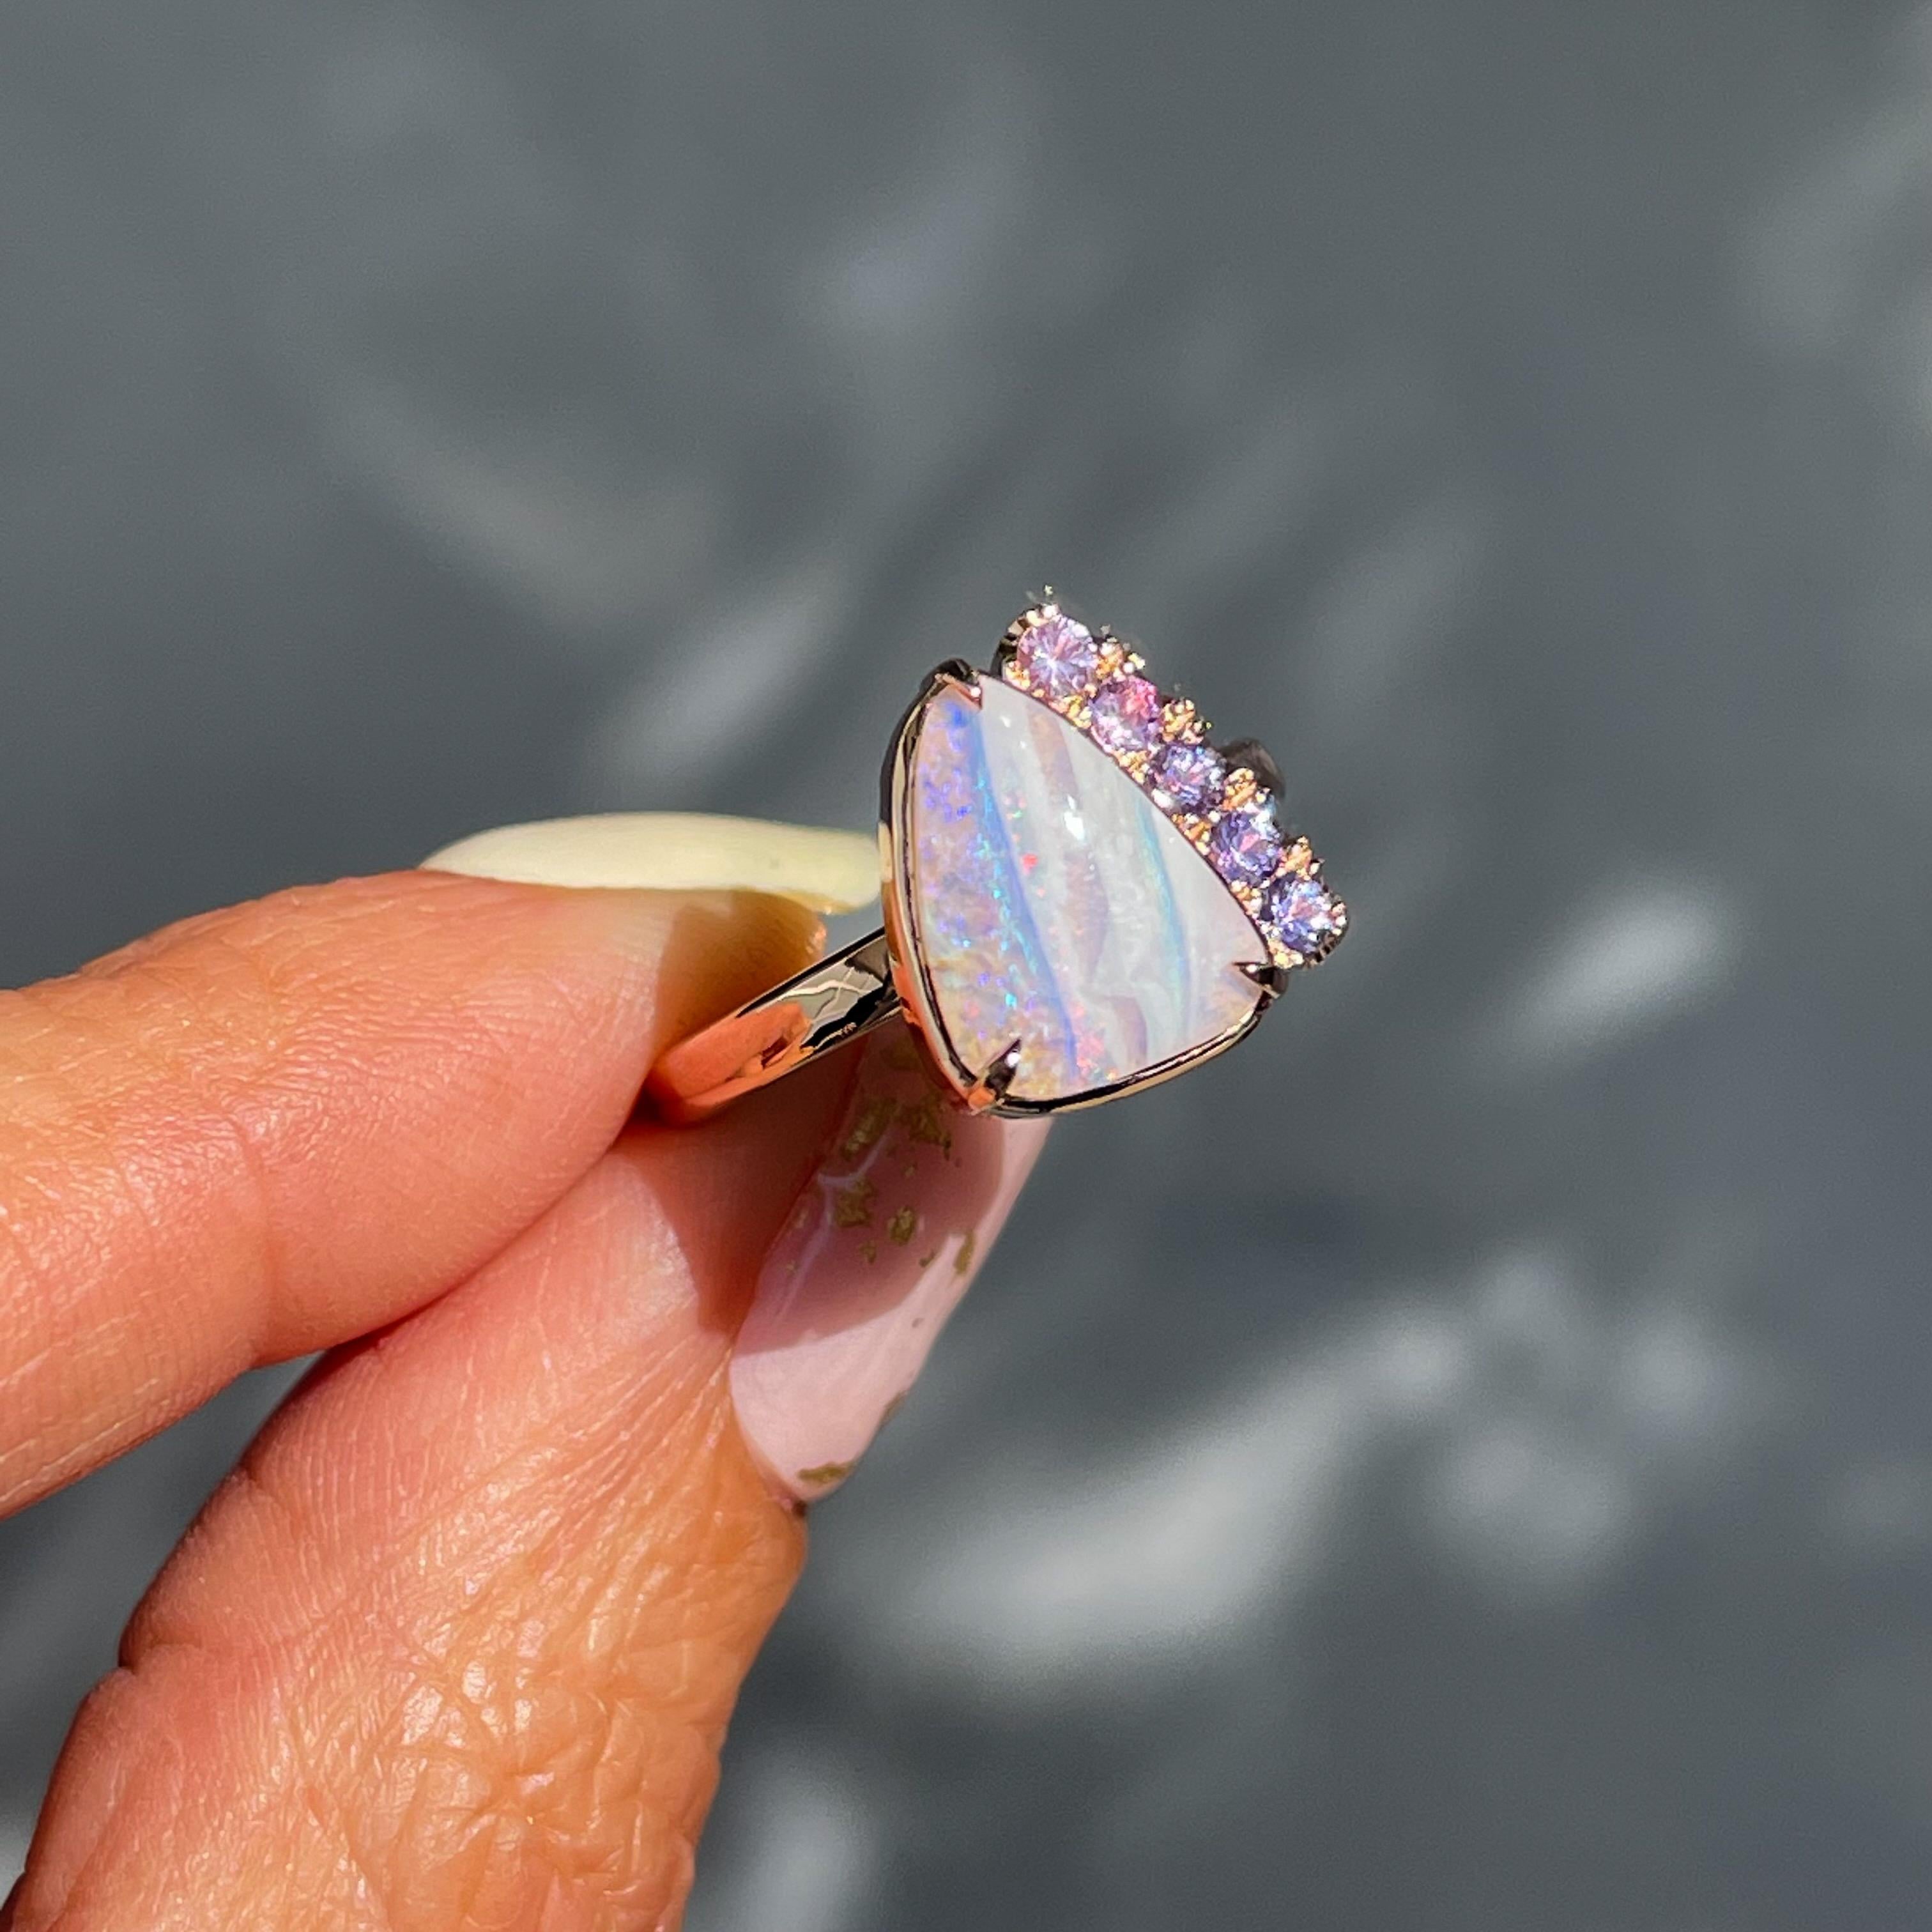 This Australian Opal Engagement Ring emanates the essence of love. Pink and purple sapphires embrace a natural opal, resulting in a stunning sapphire and opal ring. Diffused pastels streak across the stone, flashes of turquoise pulsing against the